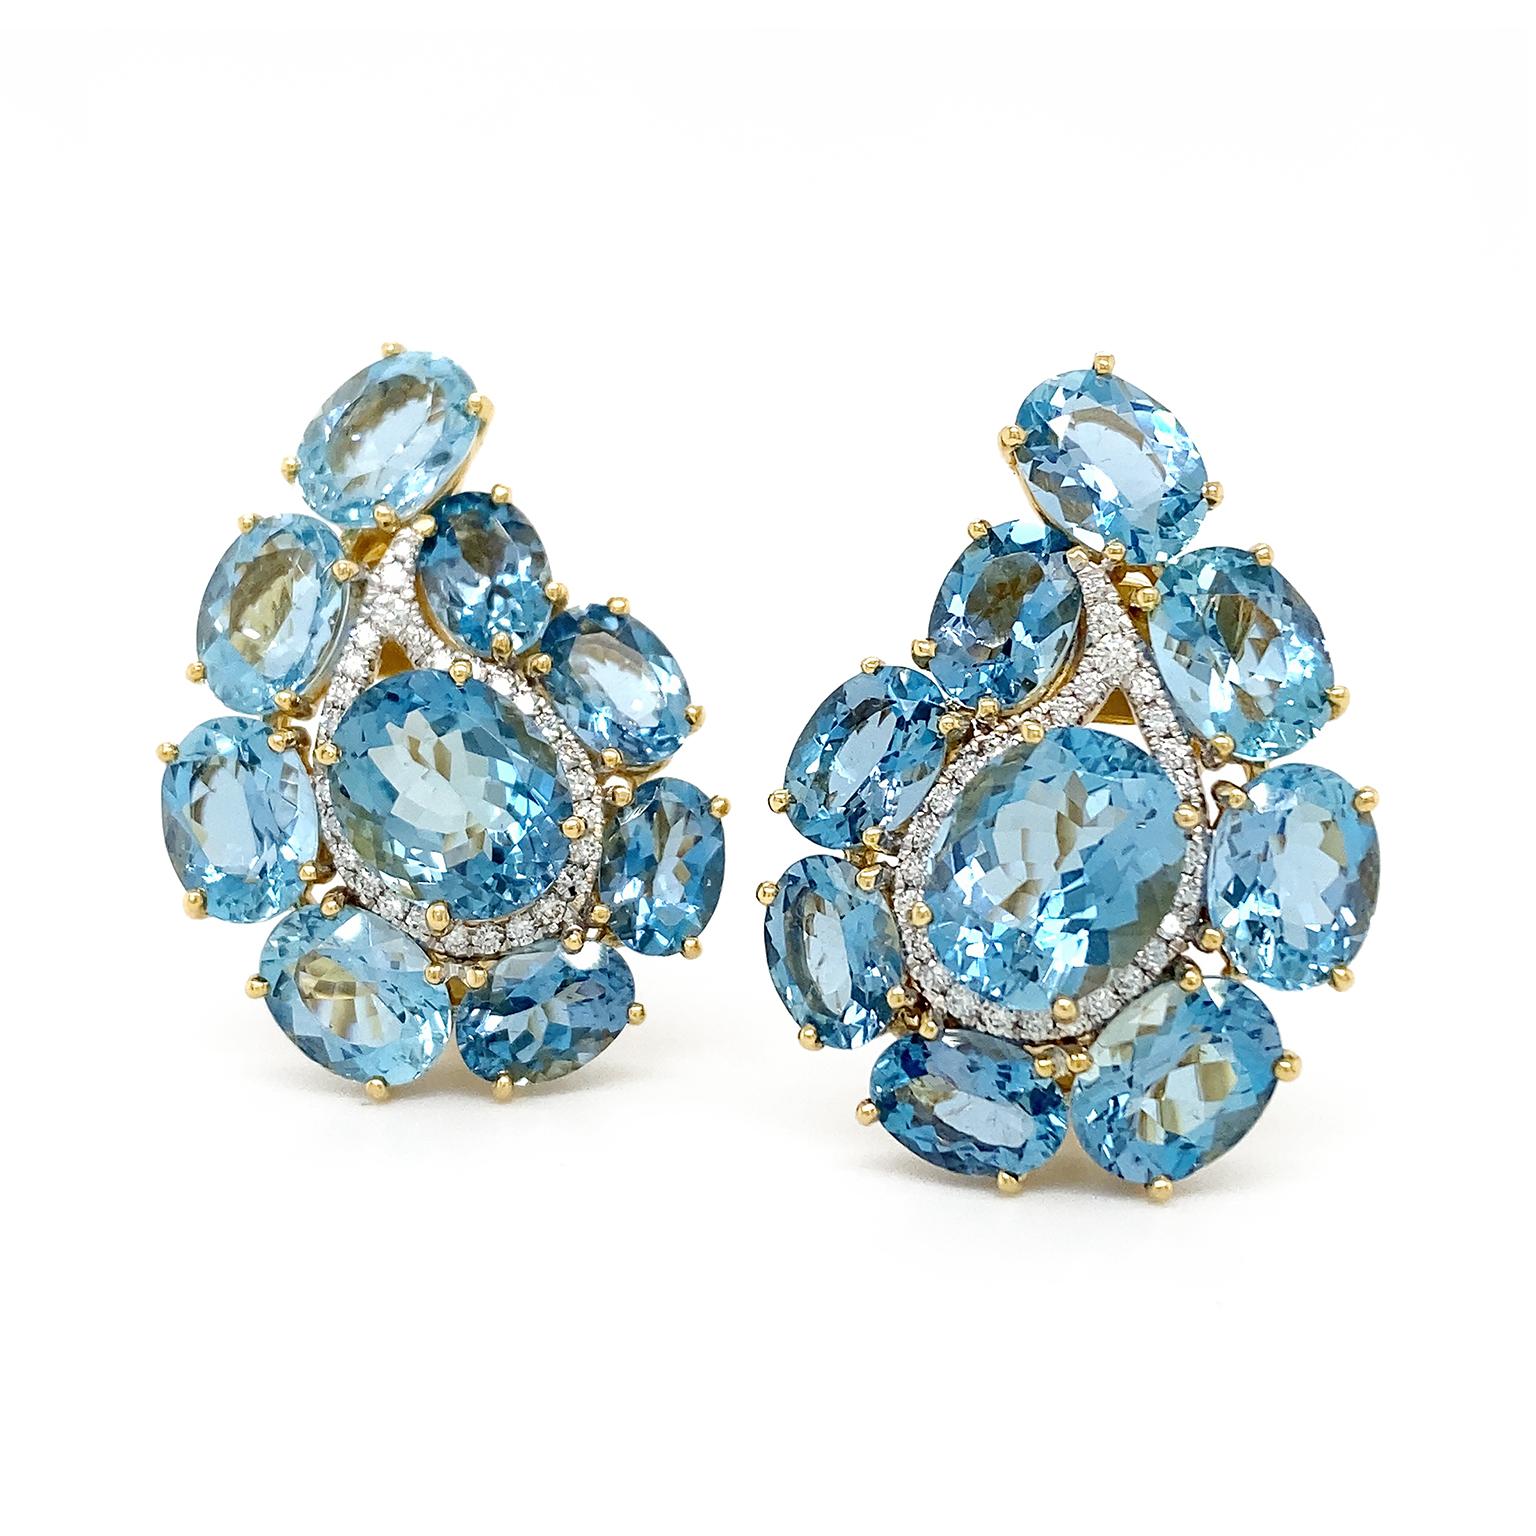 The retro ornamental design of paisley is given an elegant rendition in these earrings. Aquamarine in oval shapes outline the curved teardrop pattern, with a larger oval of the gem in the center. In between these two gems are brilliant cut diamonds